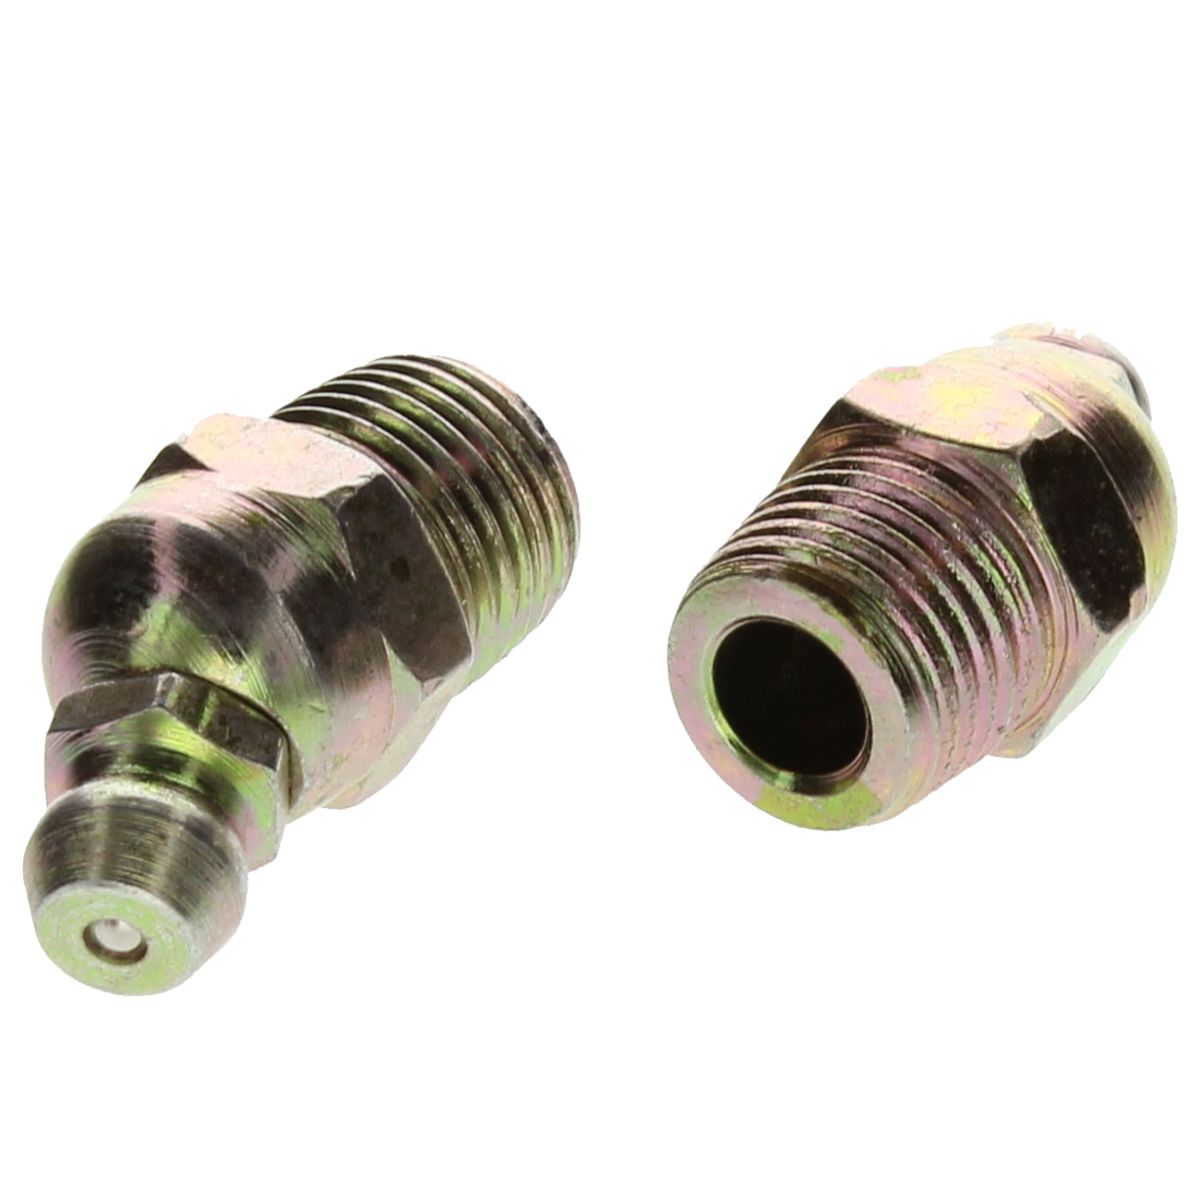 1/8" National Pipe Thread Short 30° Grease Fittings, 25/PKG